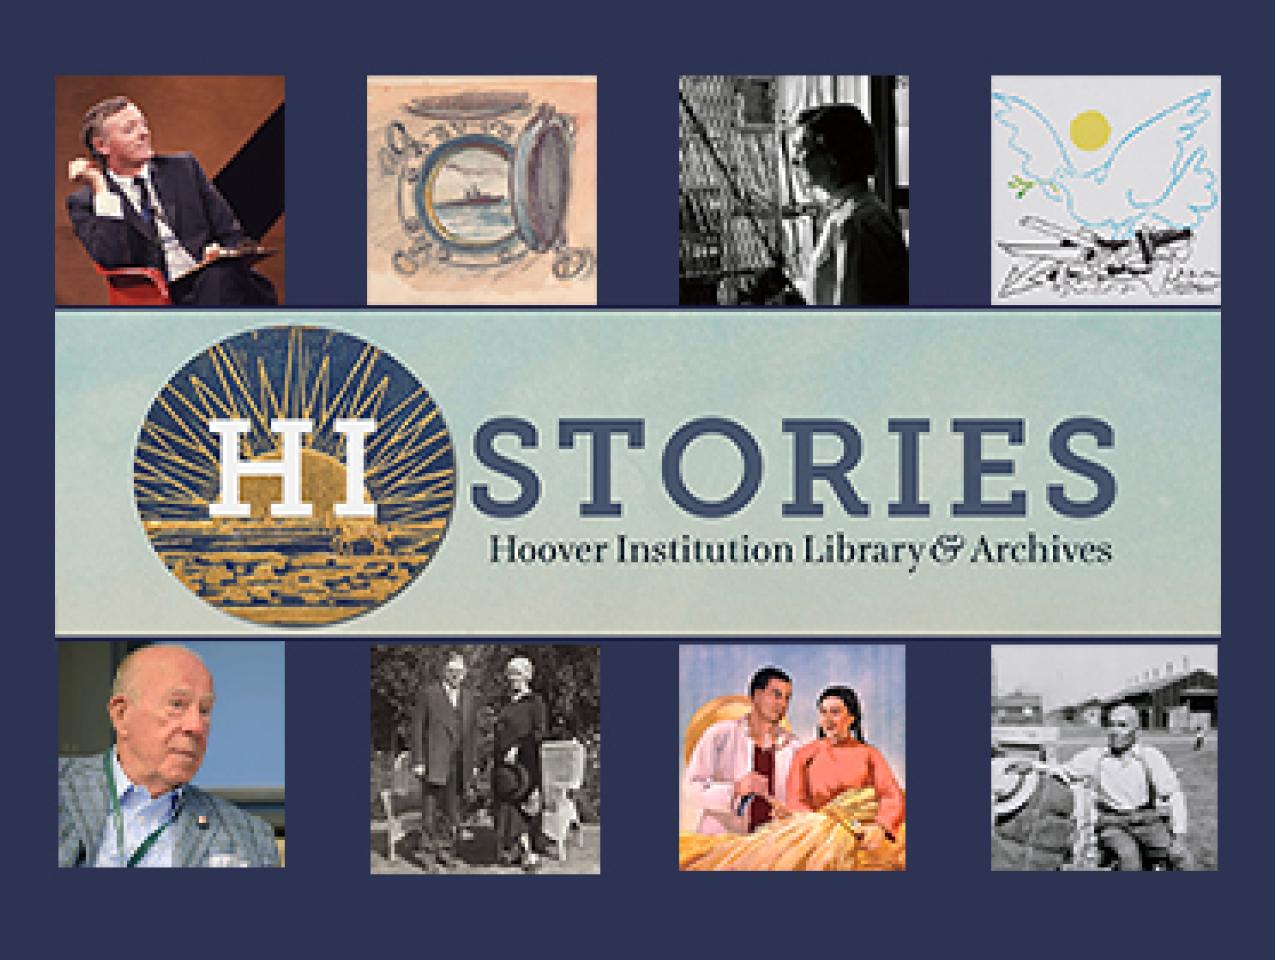 Collage of the logo for HISTORIES and 8 images from various digital stories